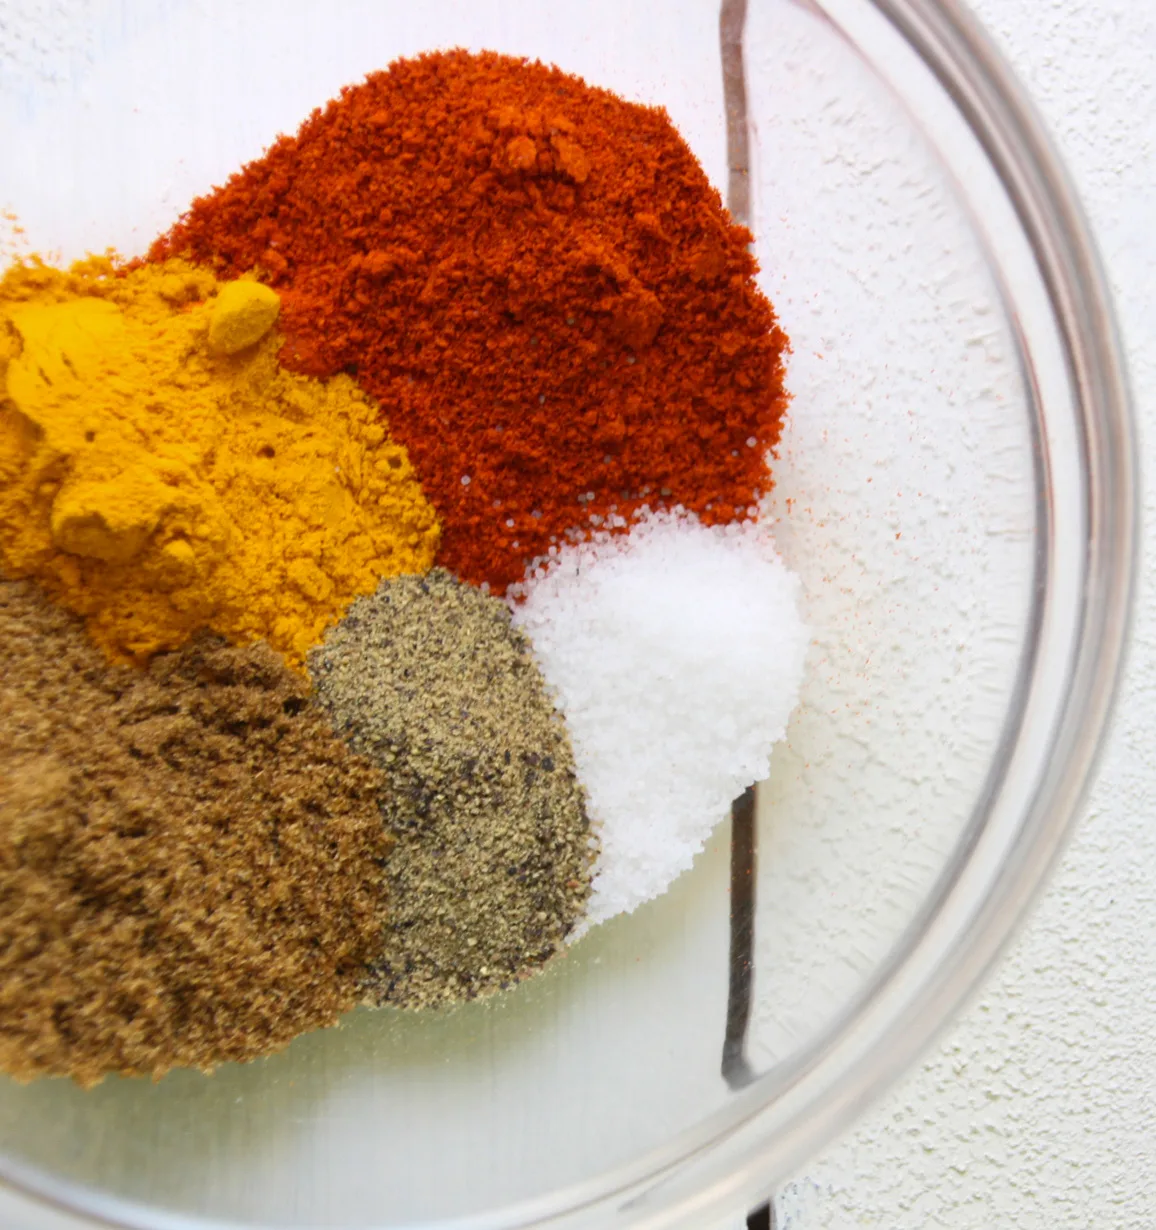 Spices for recipe in glass bowl.